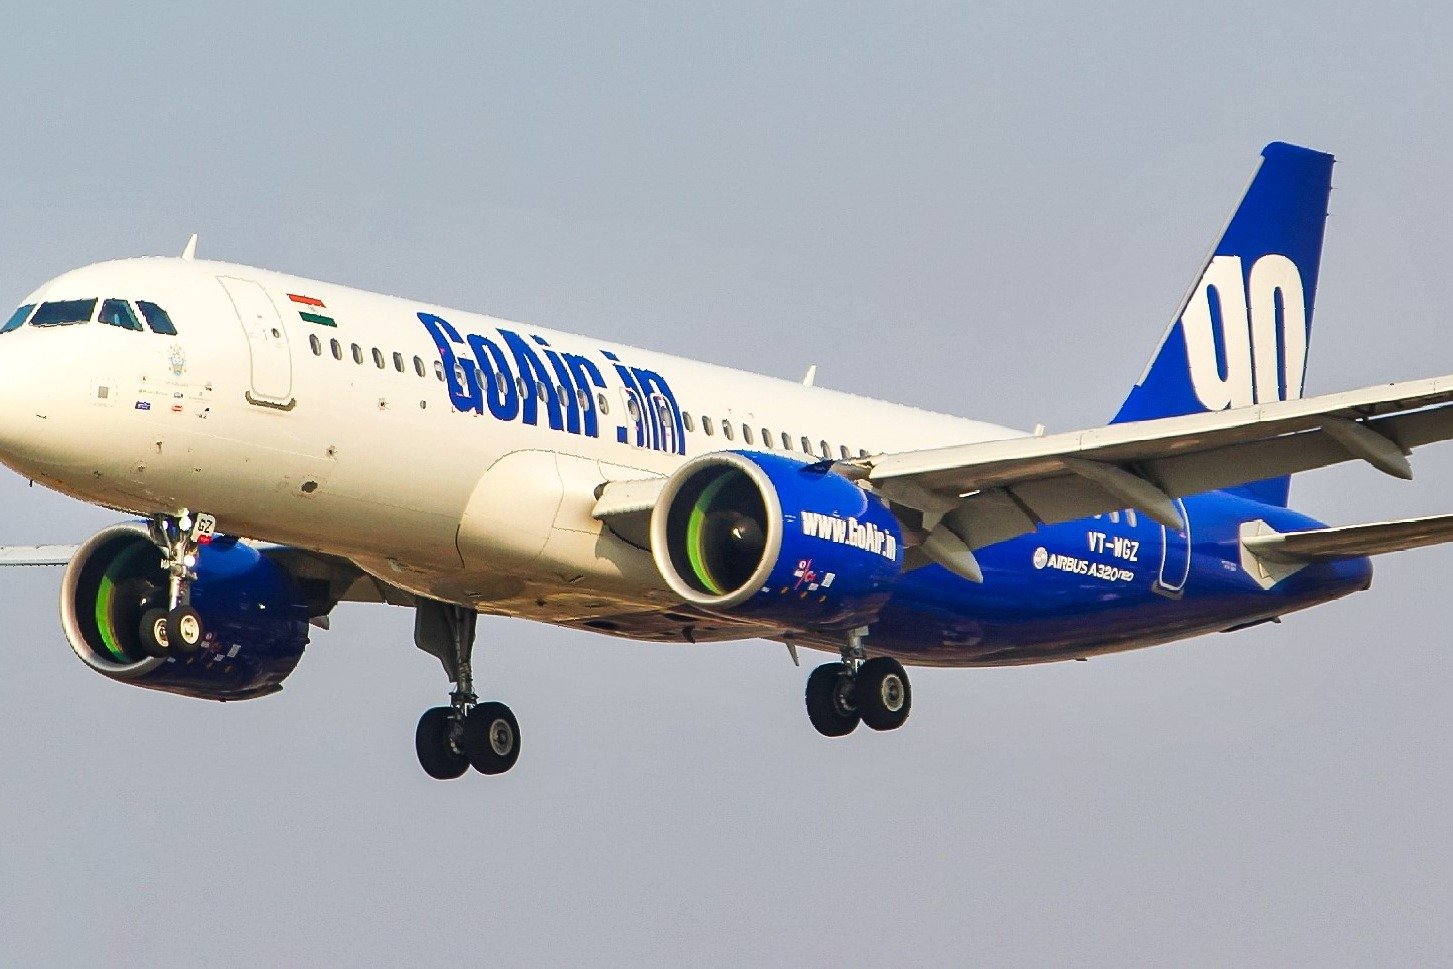 GoAir direct flight between Hyderabad and Male